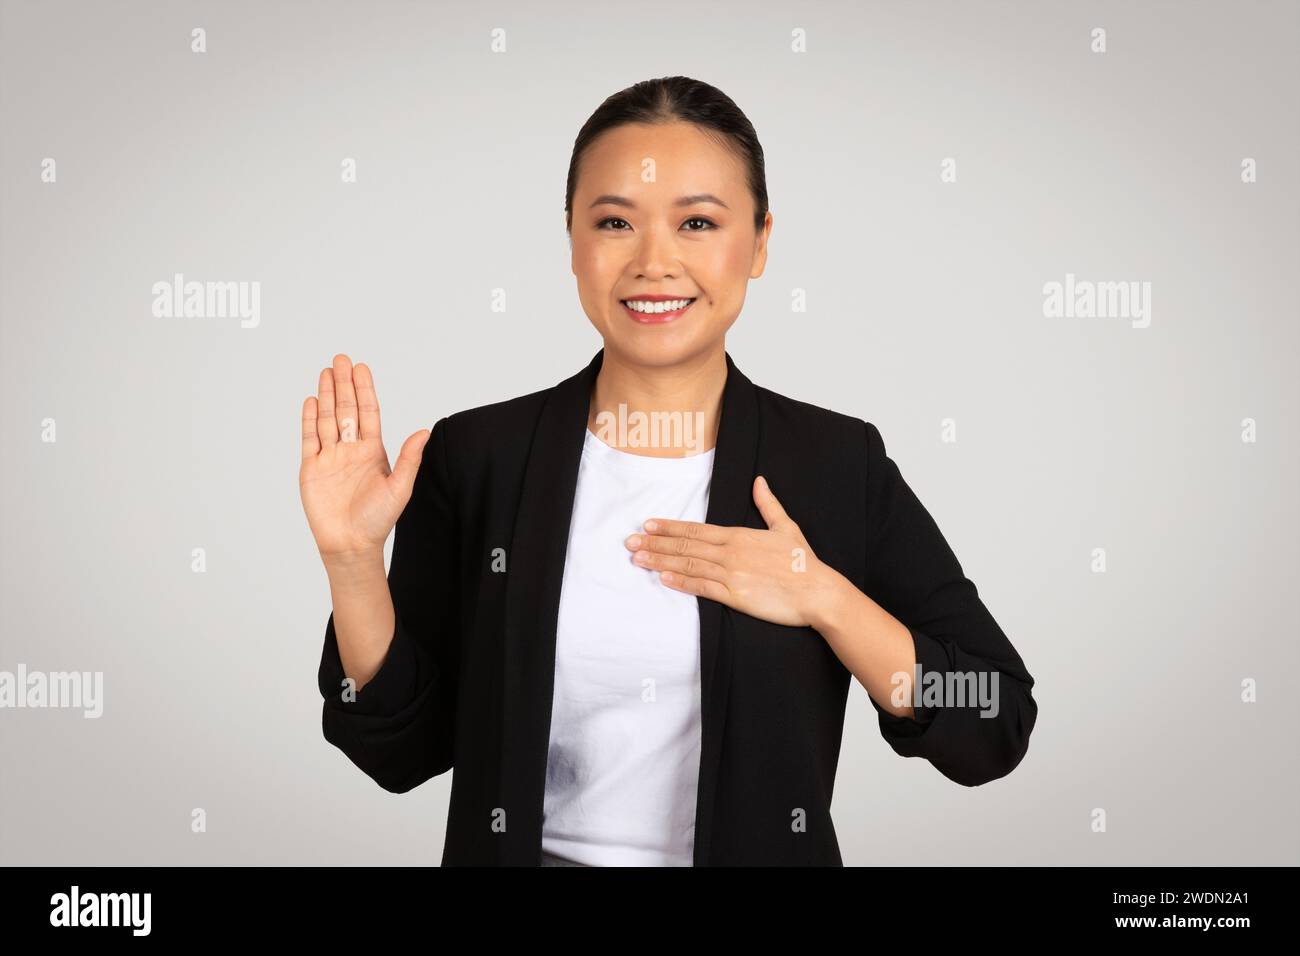 Professional Asian businesswoman making a pledge or oath gesture with a raised right hand Stock Photo